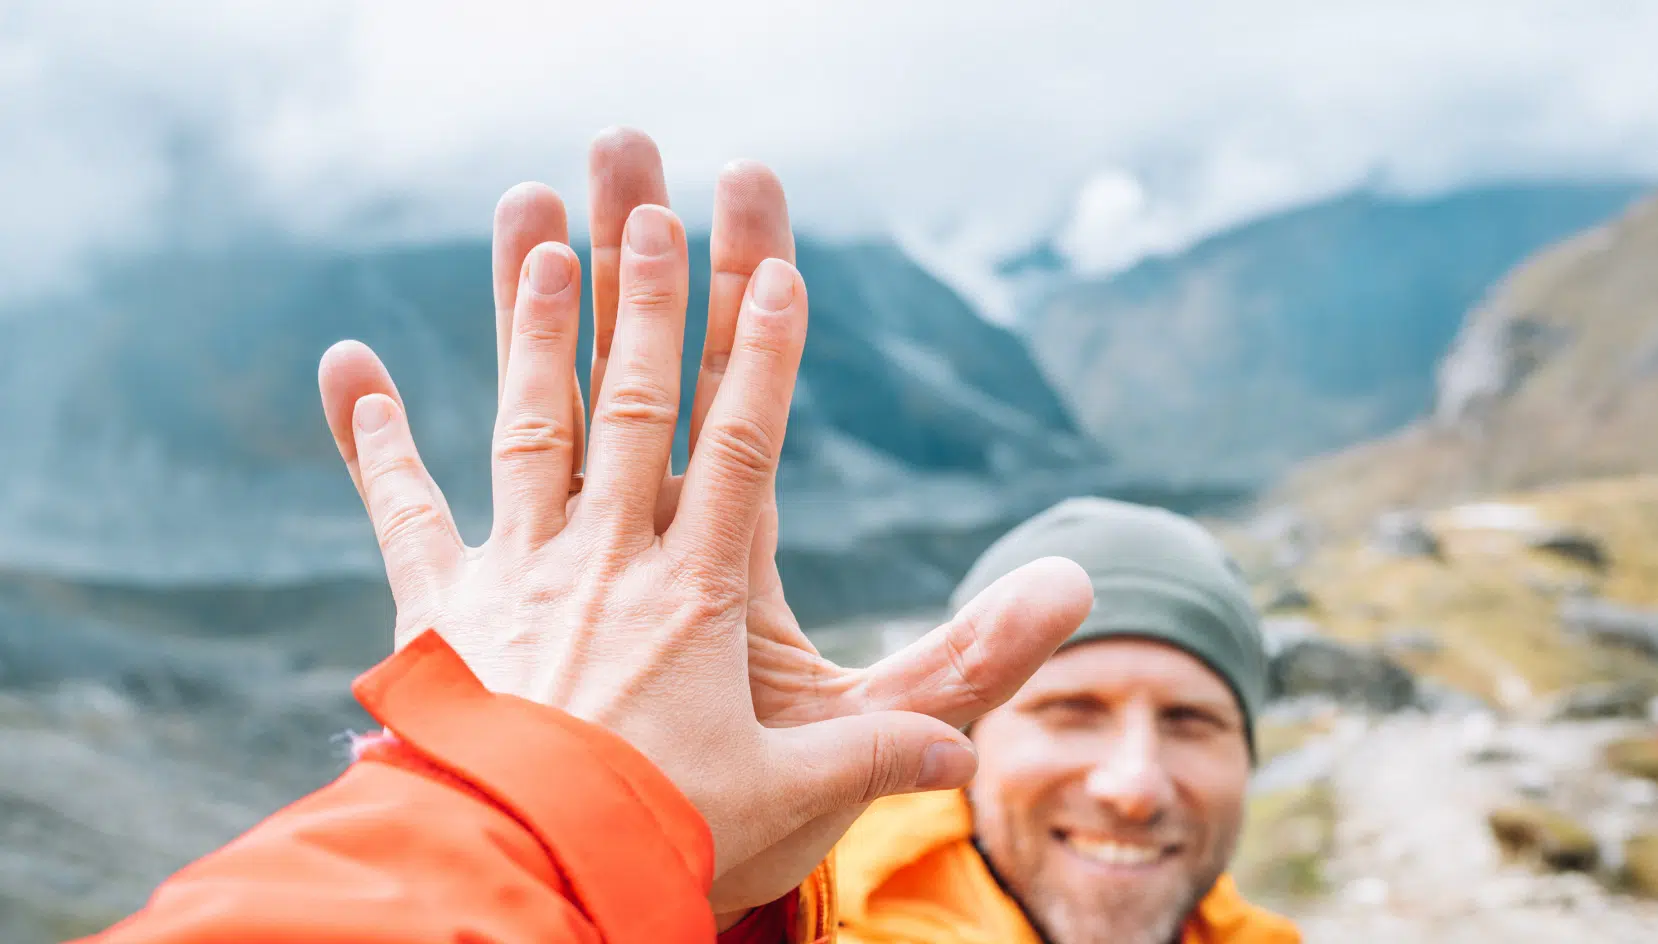 High-five from 2 friends on mountain hike